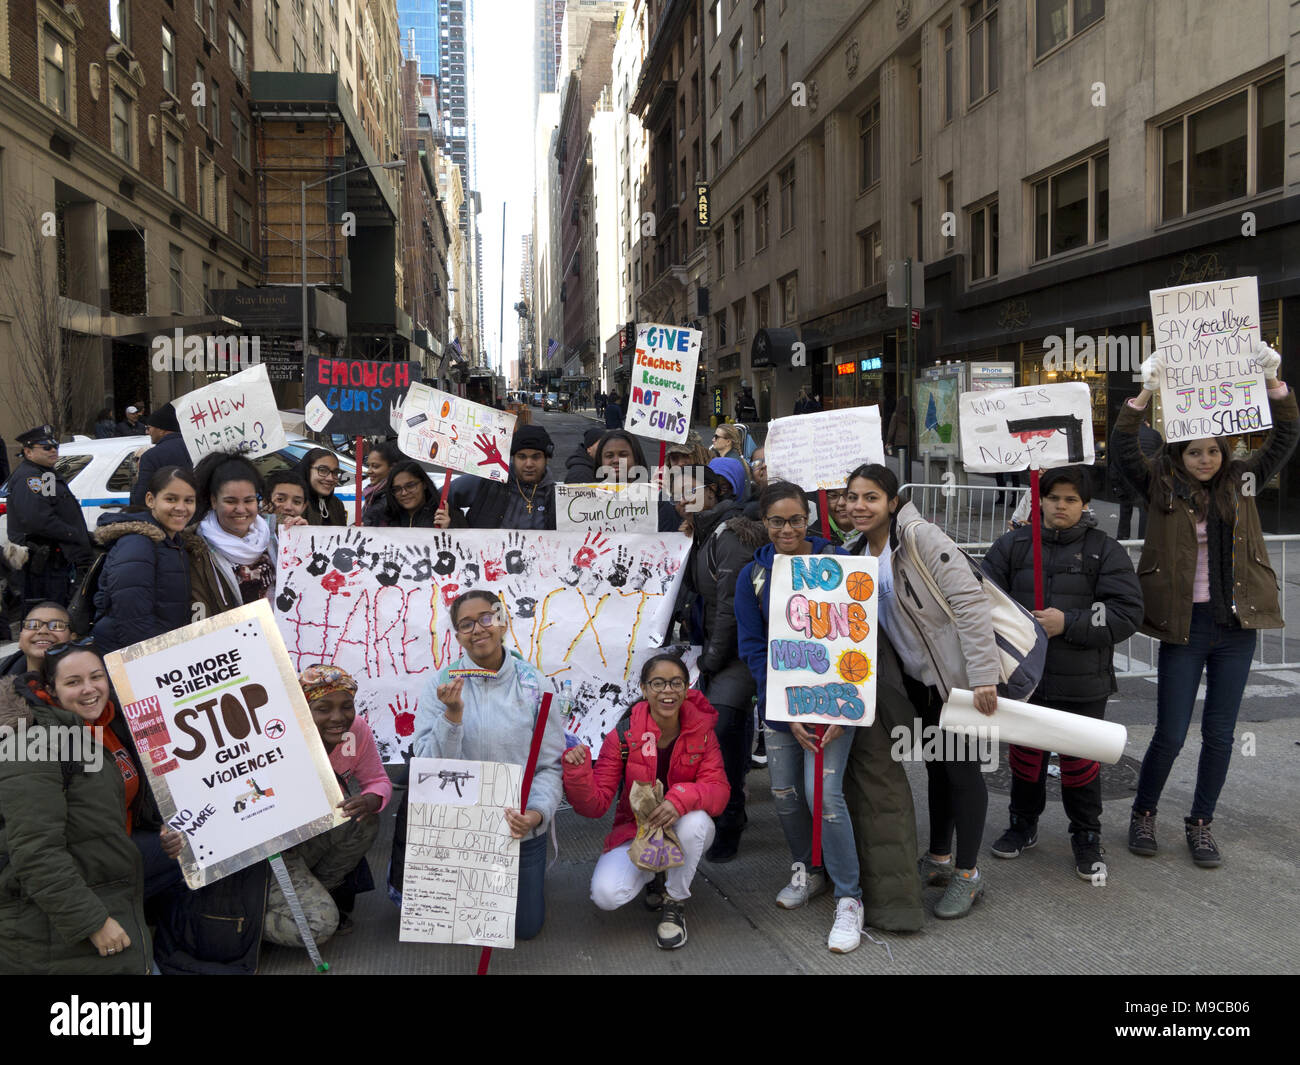 New York City, USA. 24th March, 2018. Social Studies teacher and her class participate in March For Our Lives demonstration. Thousands of protesters rally and march against gun violence and in support of stricter gun legislation in New York City, USA. Credit: Ethel Wolvovitz/Alamy Live News Stock Photo